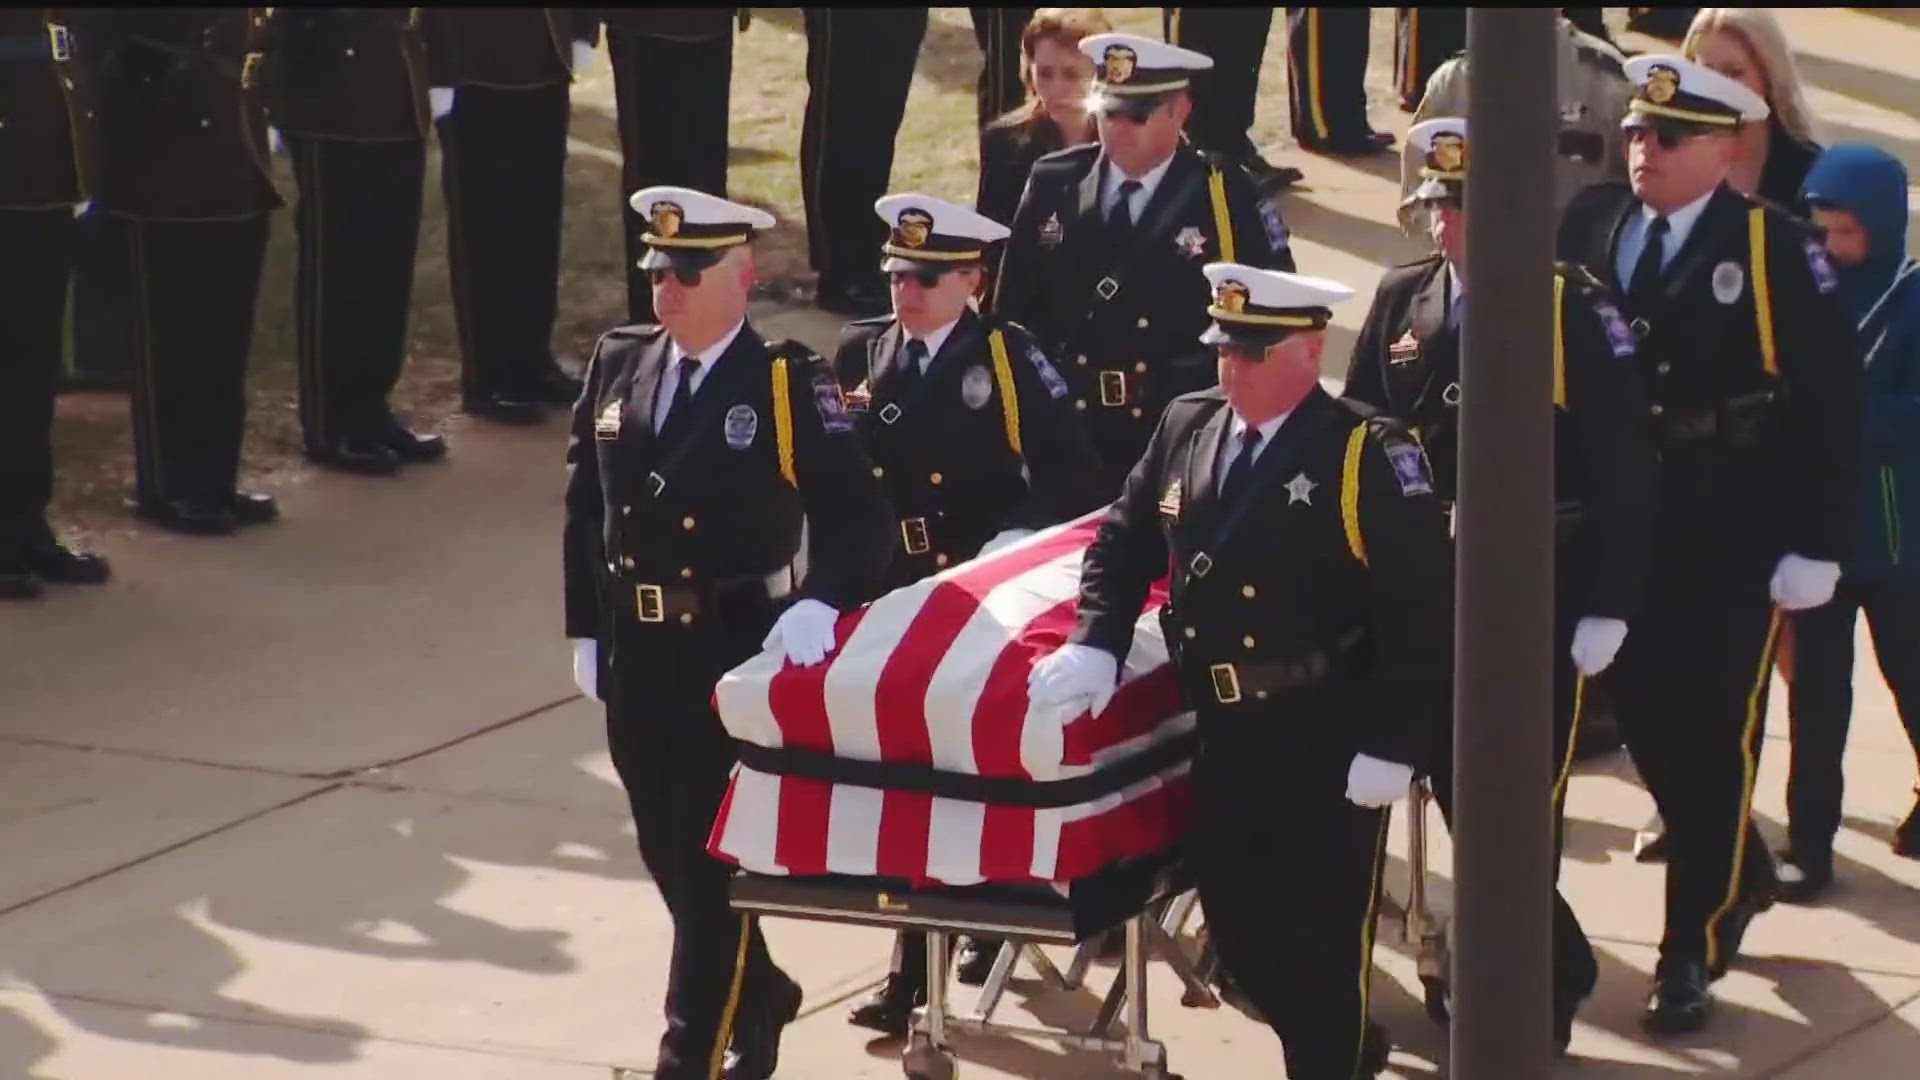 Pope County Deputy Josh Owen was remembered in a funeral service in Glenwood, Minnesota on Saturday, April 22.